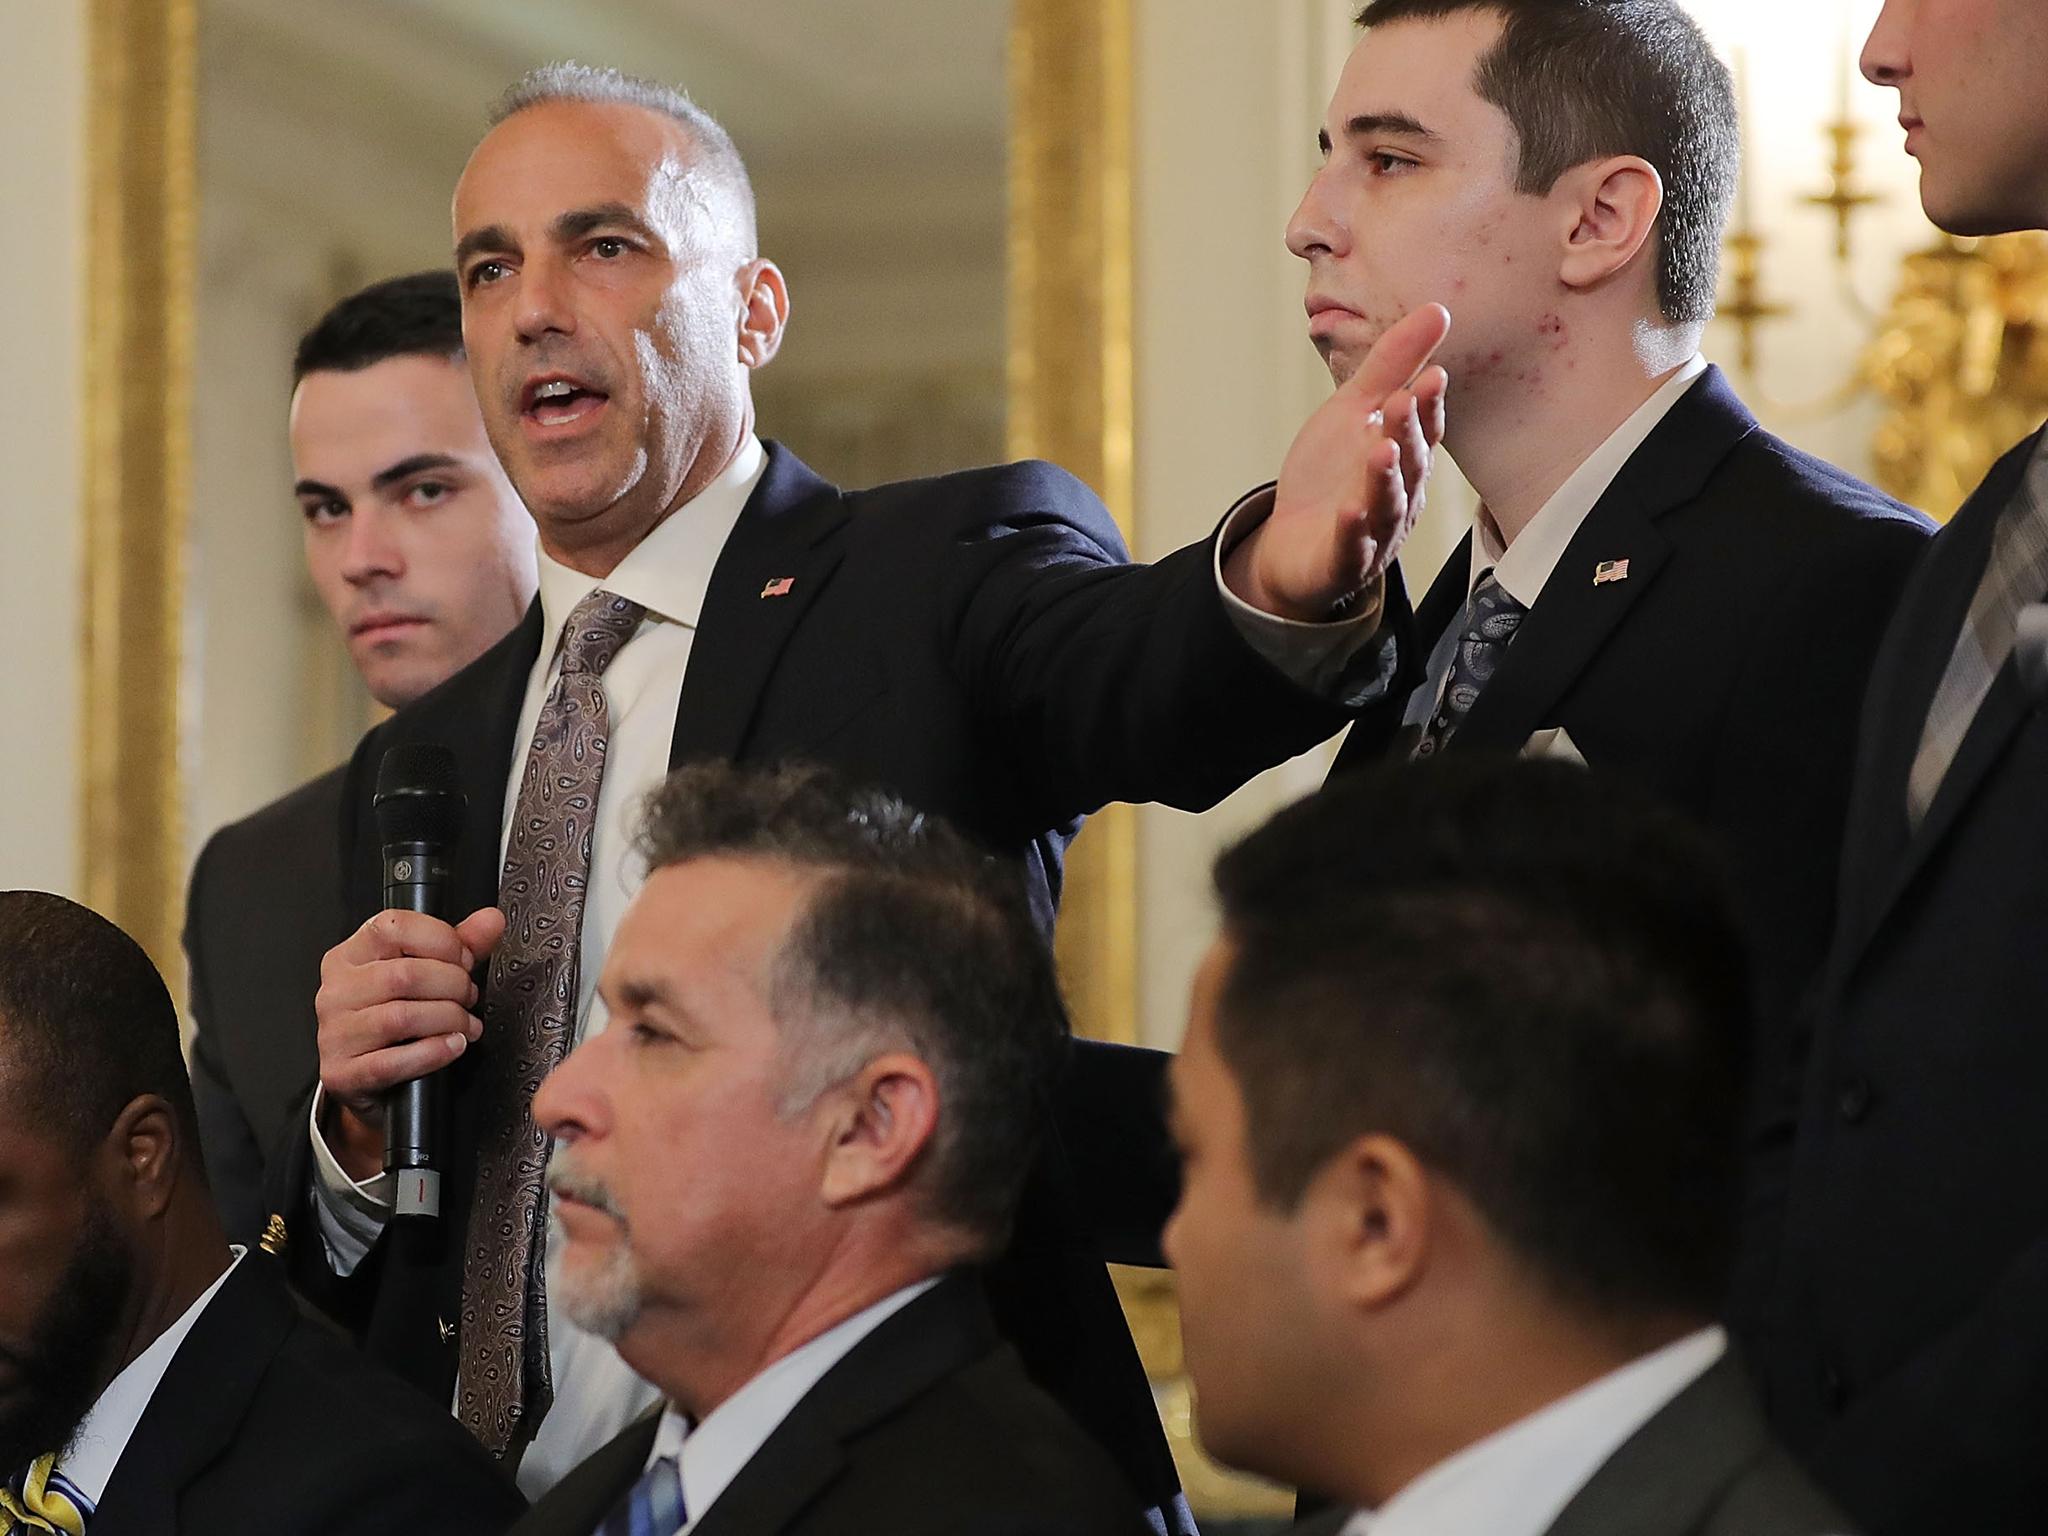 &#13;
Andrew Pollack, whose daughter Meadow was killed in the Parkland shooting, is joined by his sons as he addresses a listening session with Donald Trump in the White House on Wednesday (Getty)&#13;